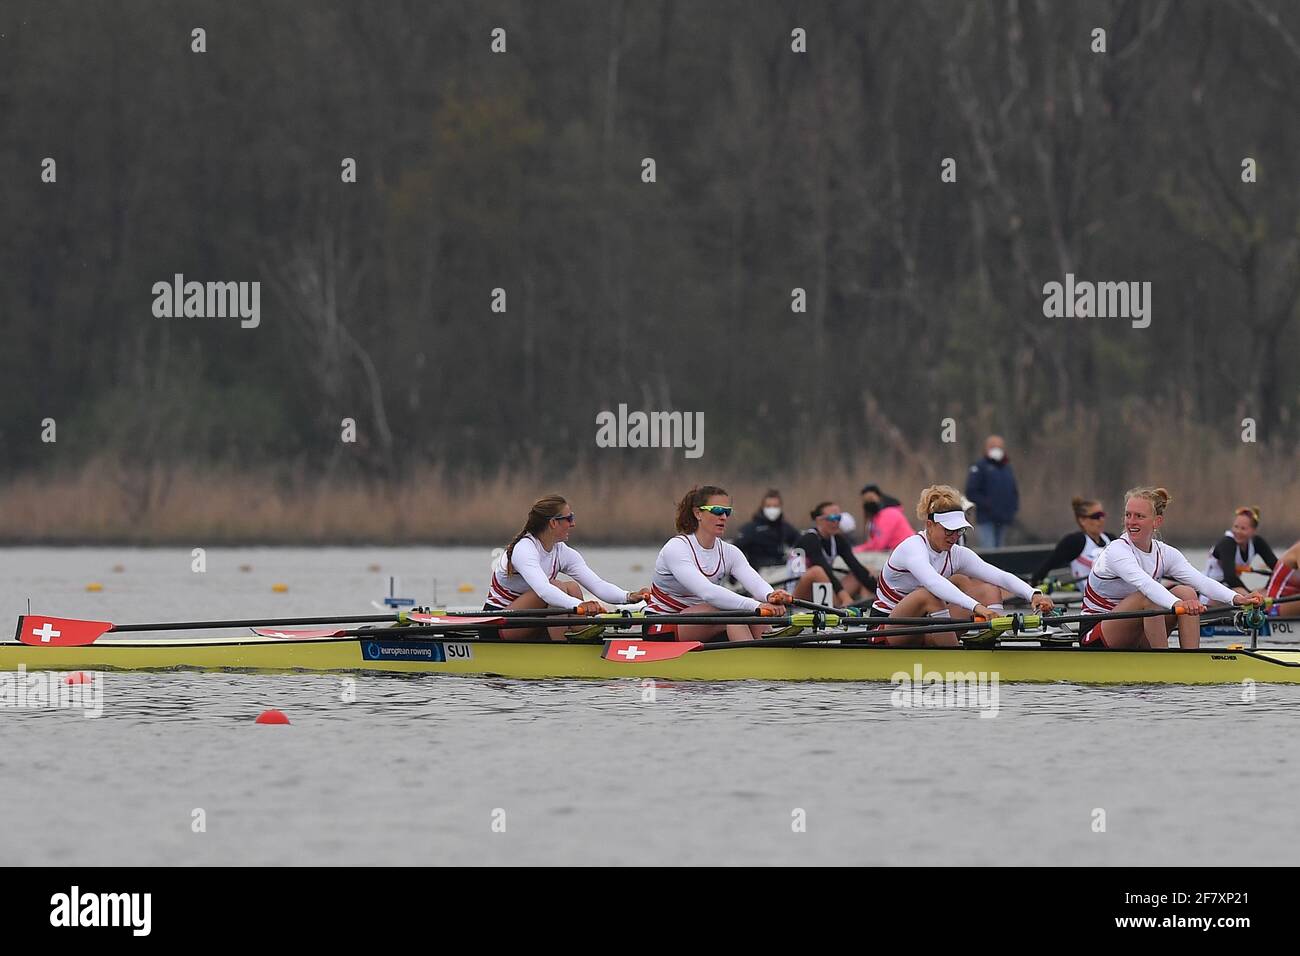 Varese, Italy. 10th Apr, 2021. Fabienne Schweizer, Pascale Walker, Lisa Loetscher, Eloise Von Der Schulenburg (SUI), Women's Quadruple Sculls during European Rowing Championships 2021, Canoying in Varese, Italy, April 10 2021 Credit: Independent Photo Agency/Alamy Live News Stock Photo